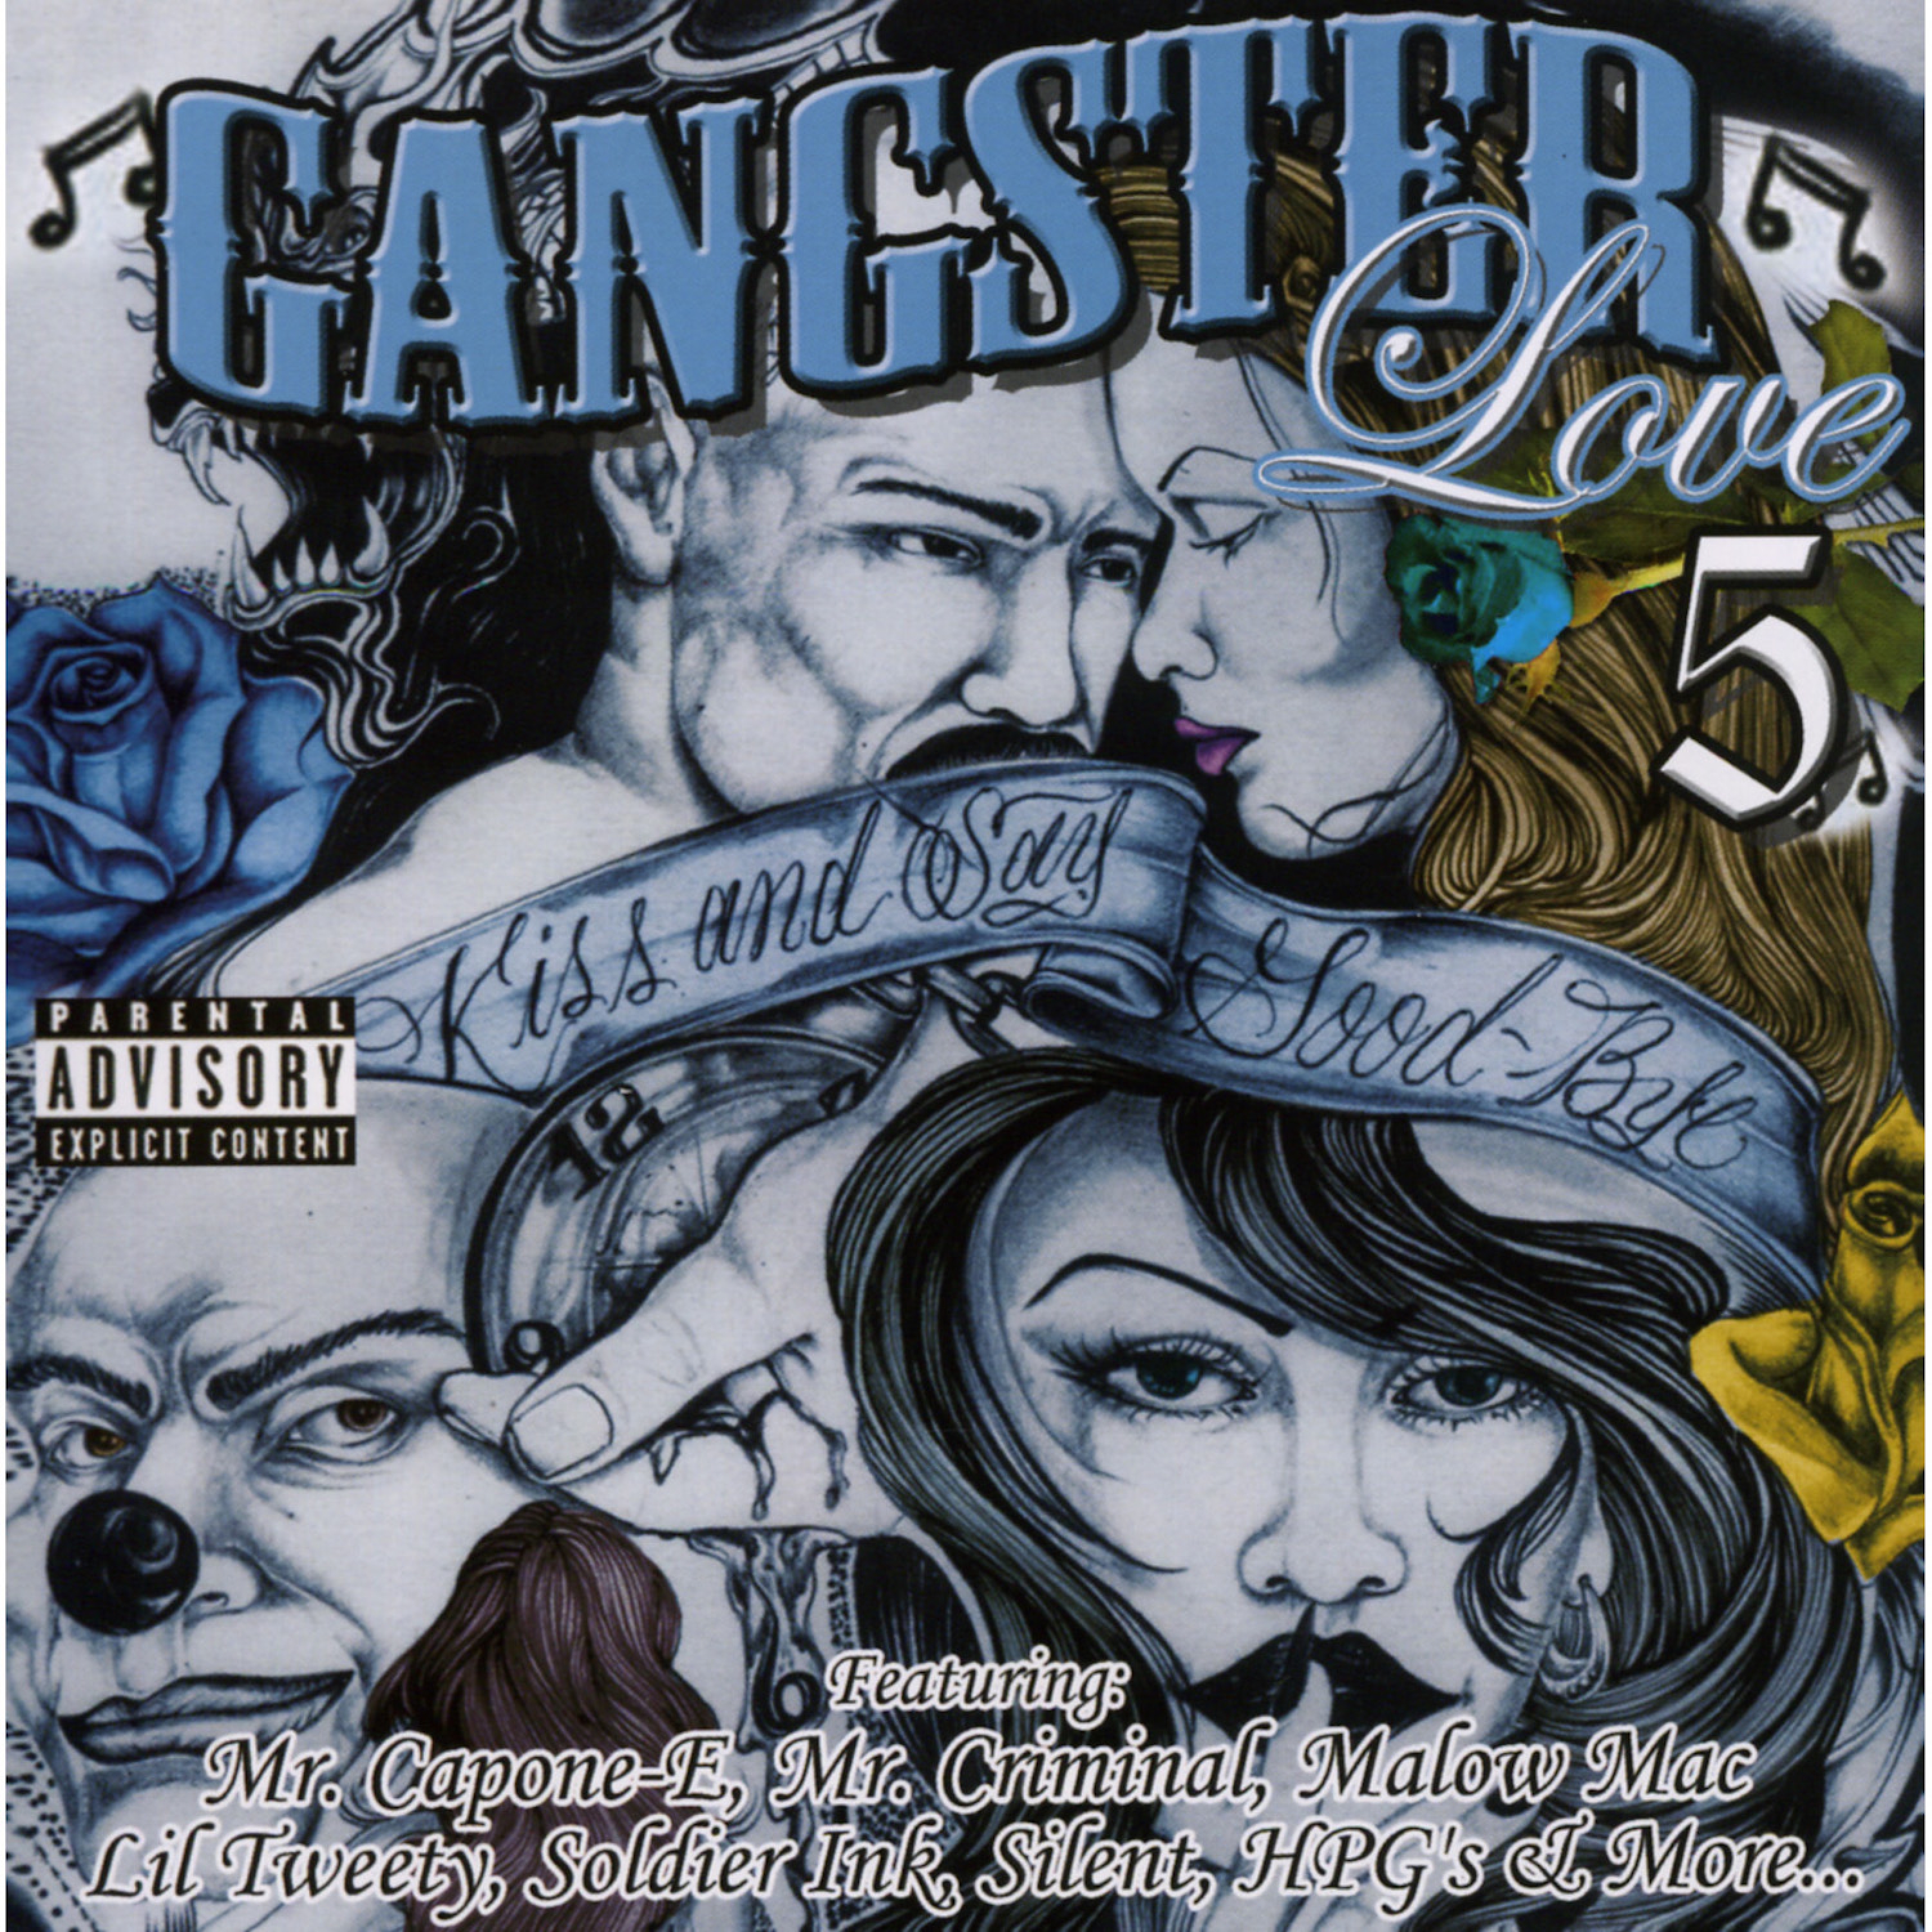 Gangster's Need Love 2